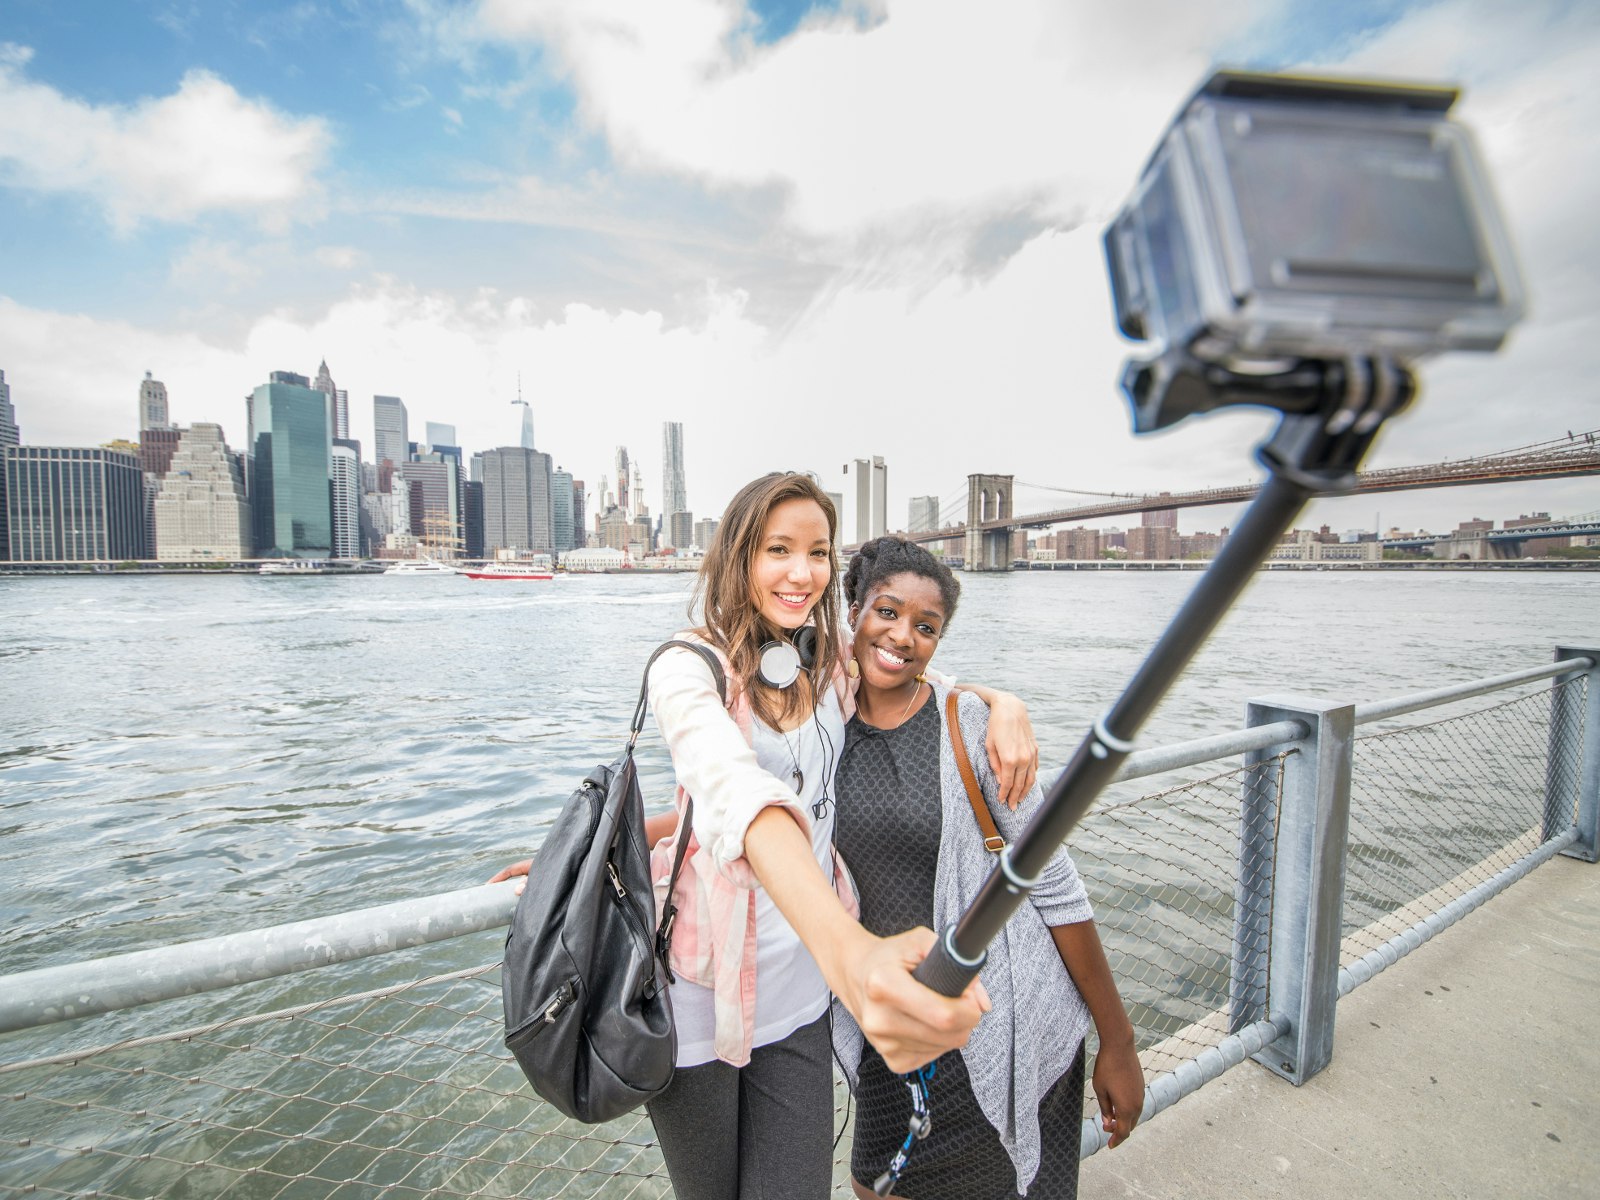 Two women taking a selfie with the New York skyline in the background